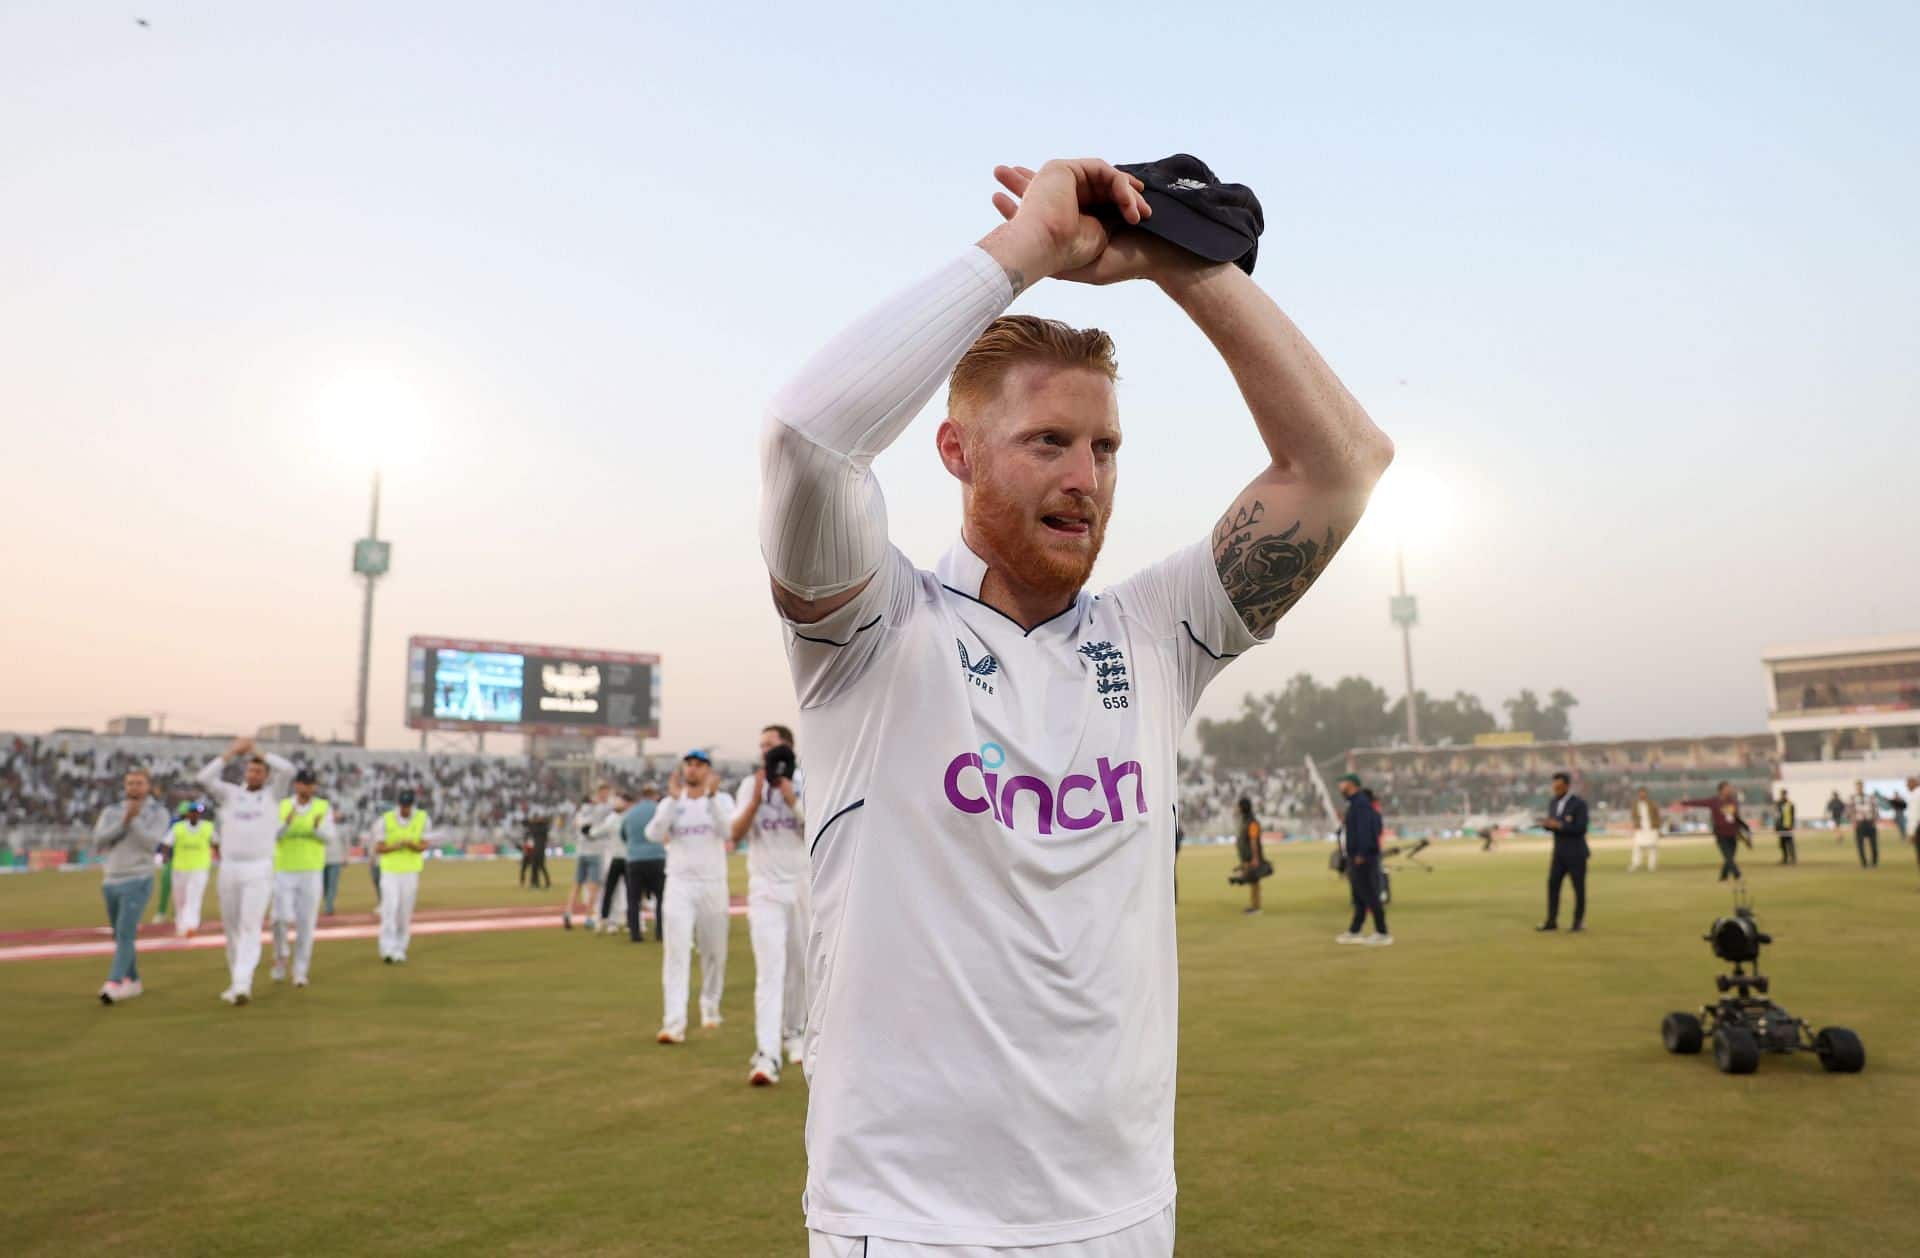 "I might declare without batting one day" - Ben Stokes  